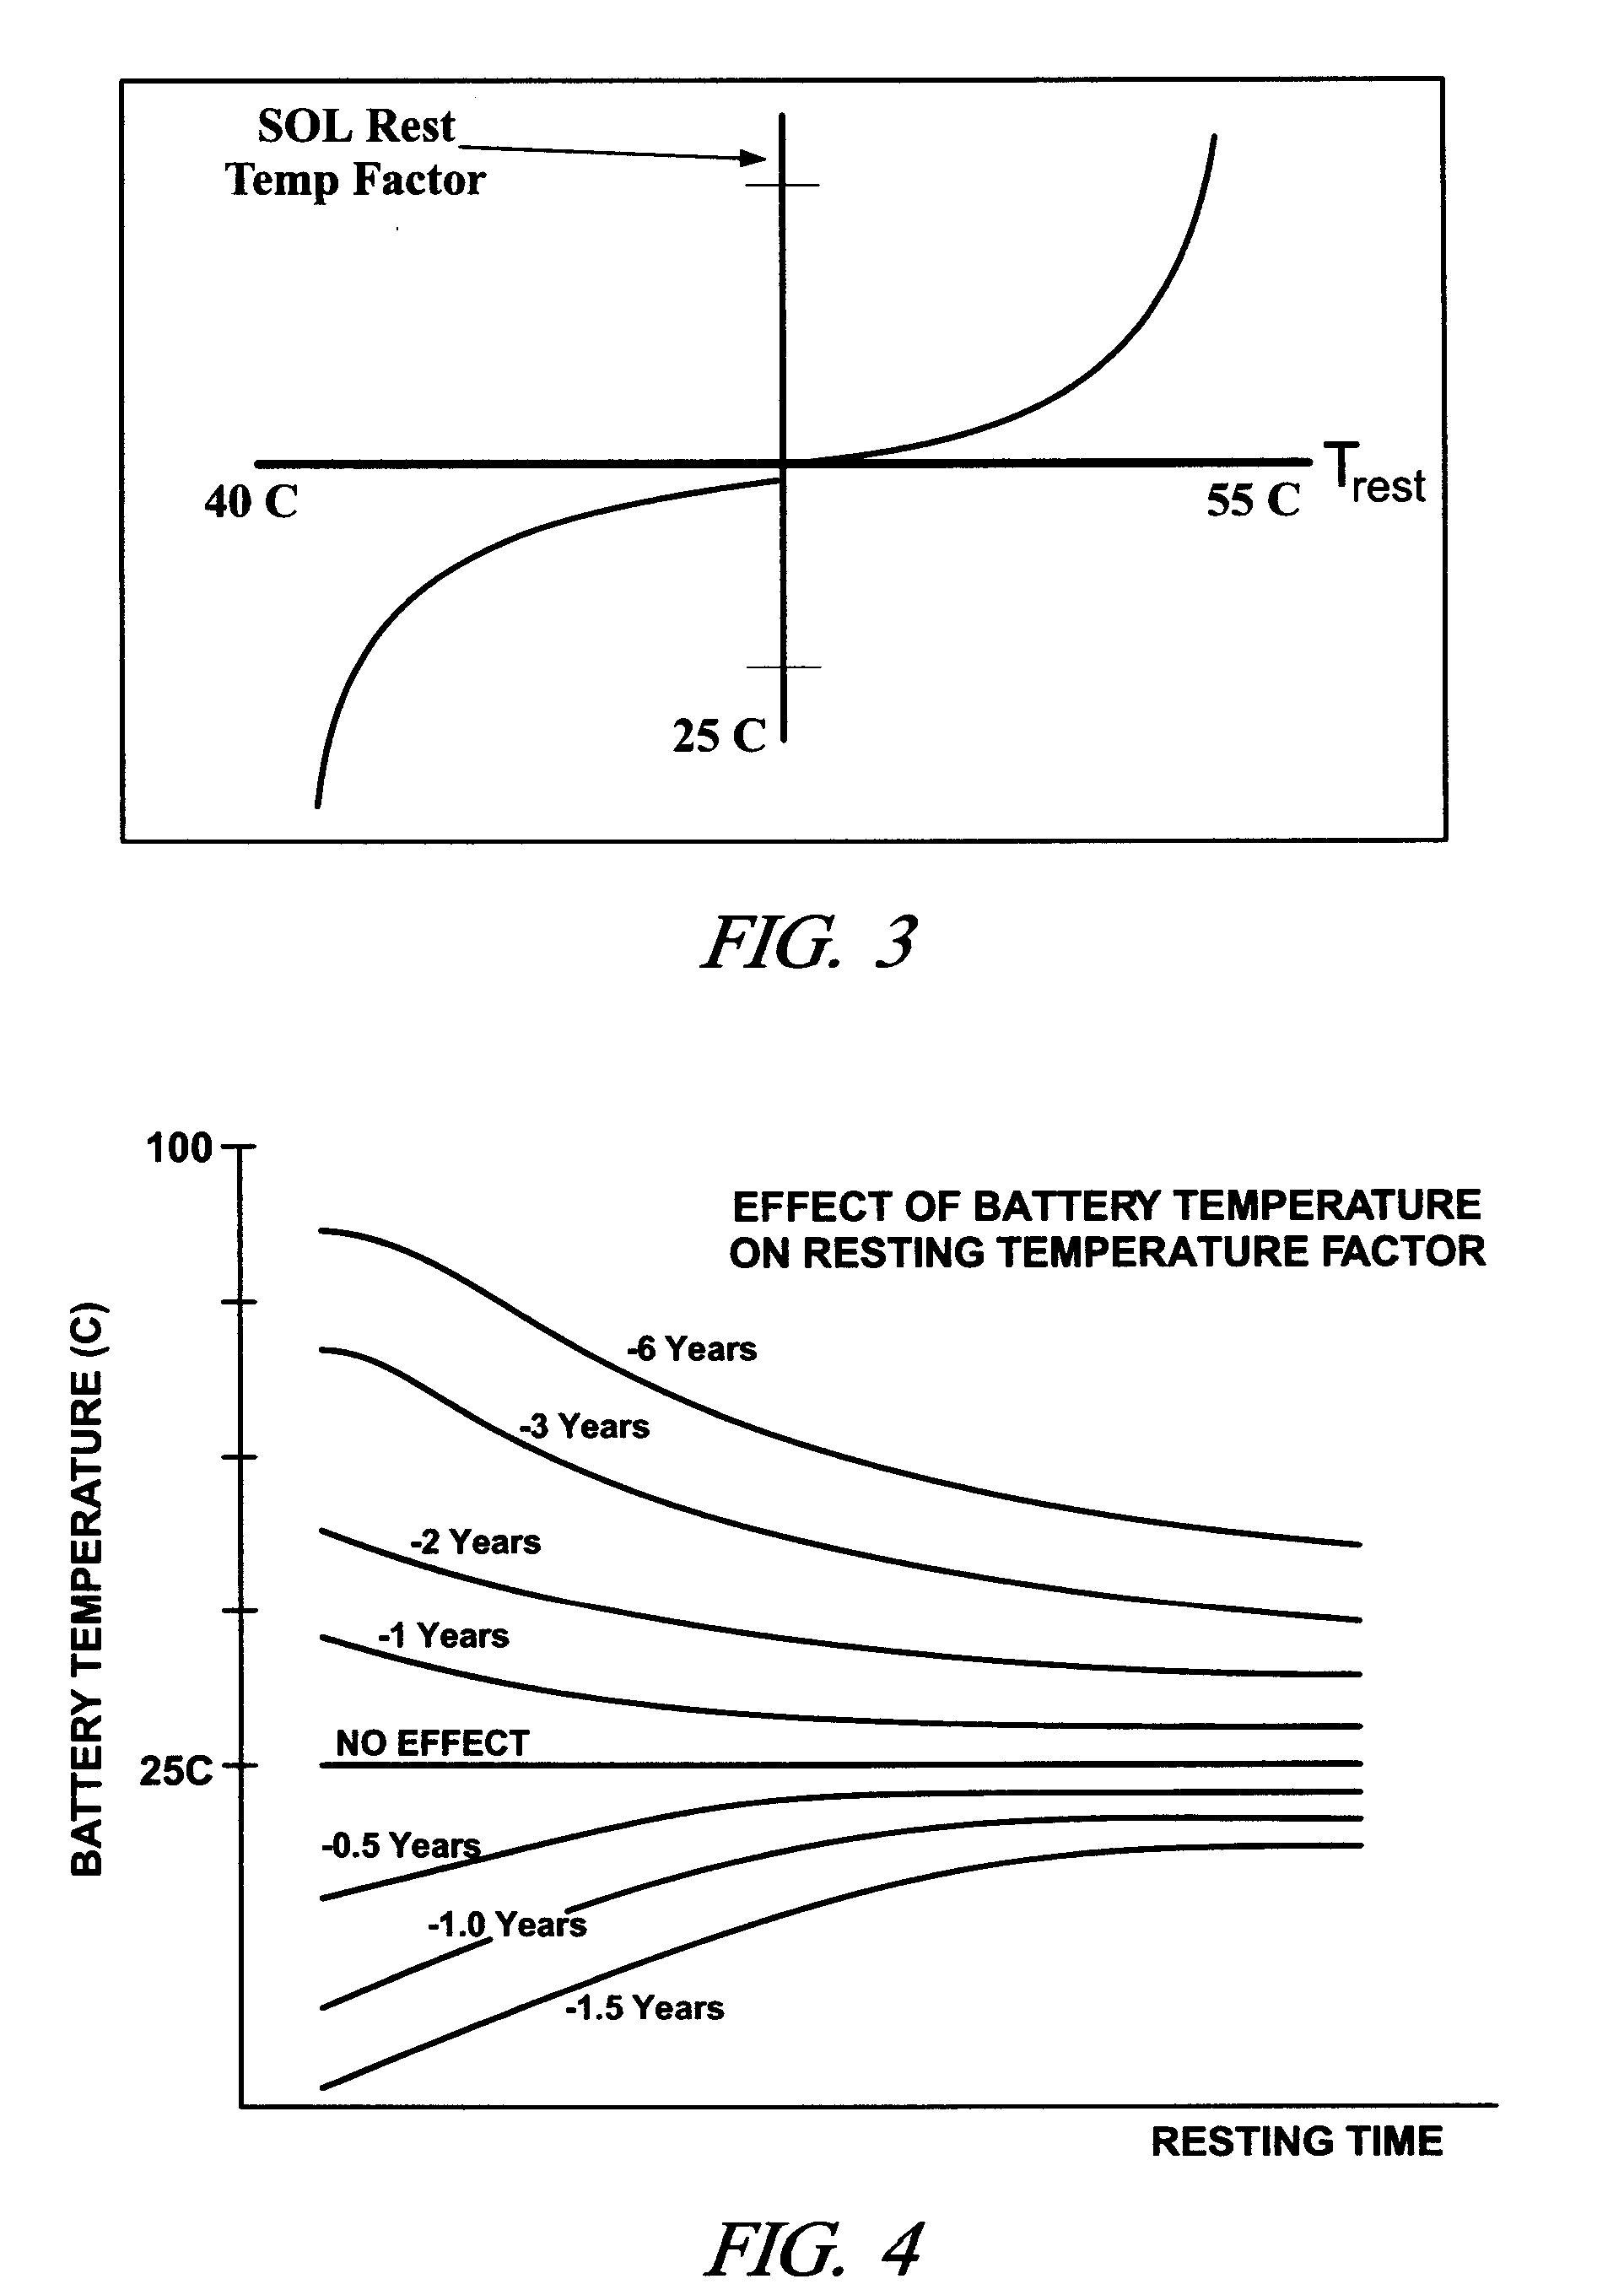 Method and apparatus for quantifying quiescent period temperature effects upon an electric energy storage device